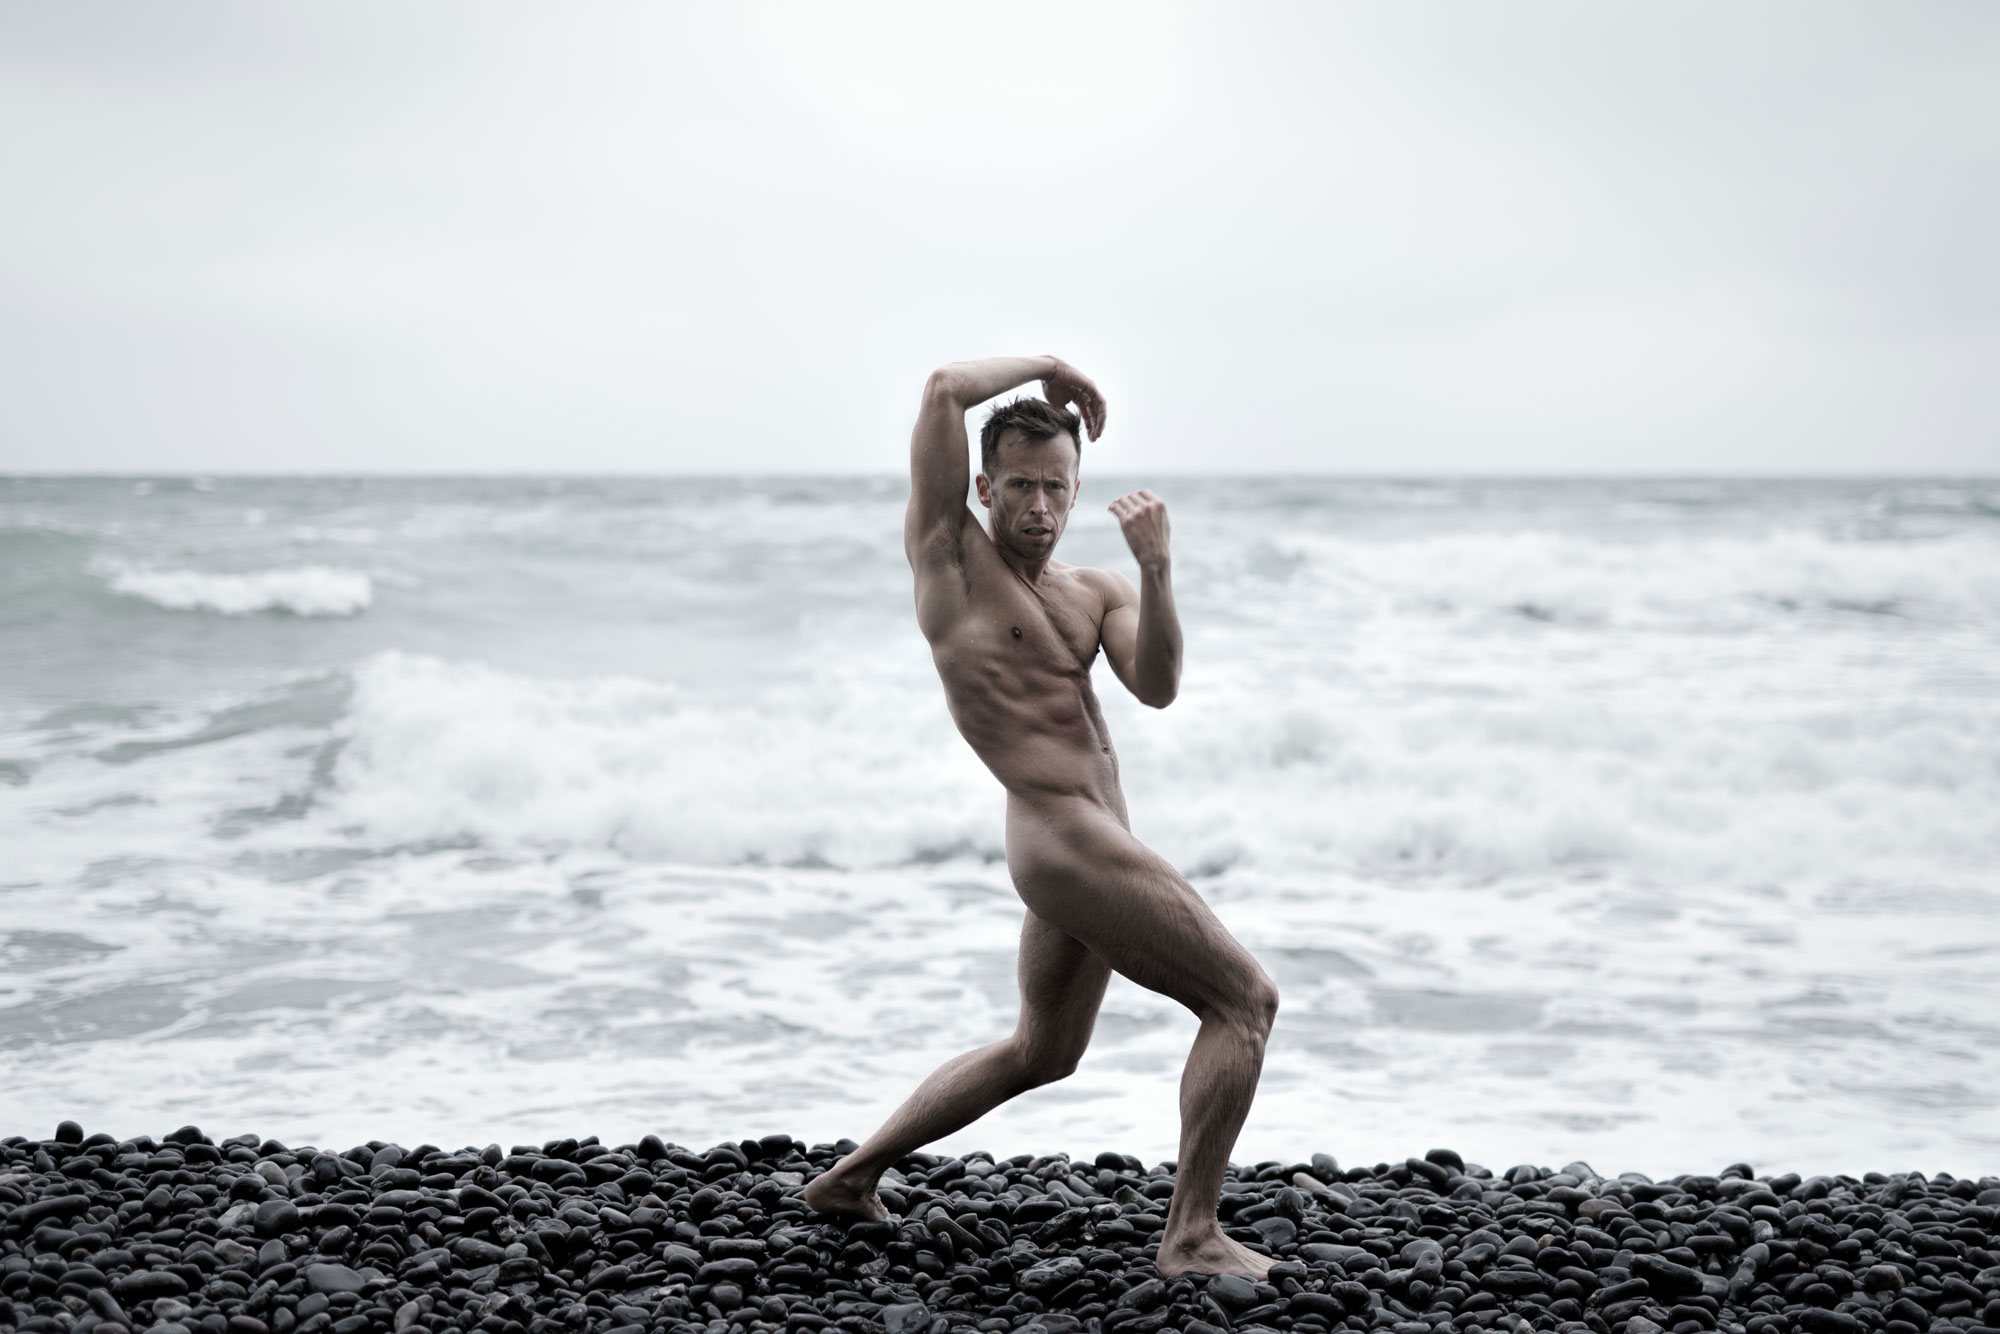 – EXCLUSIVE – «DRIFTWOOD» – Paul James Rooney by Joohans.